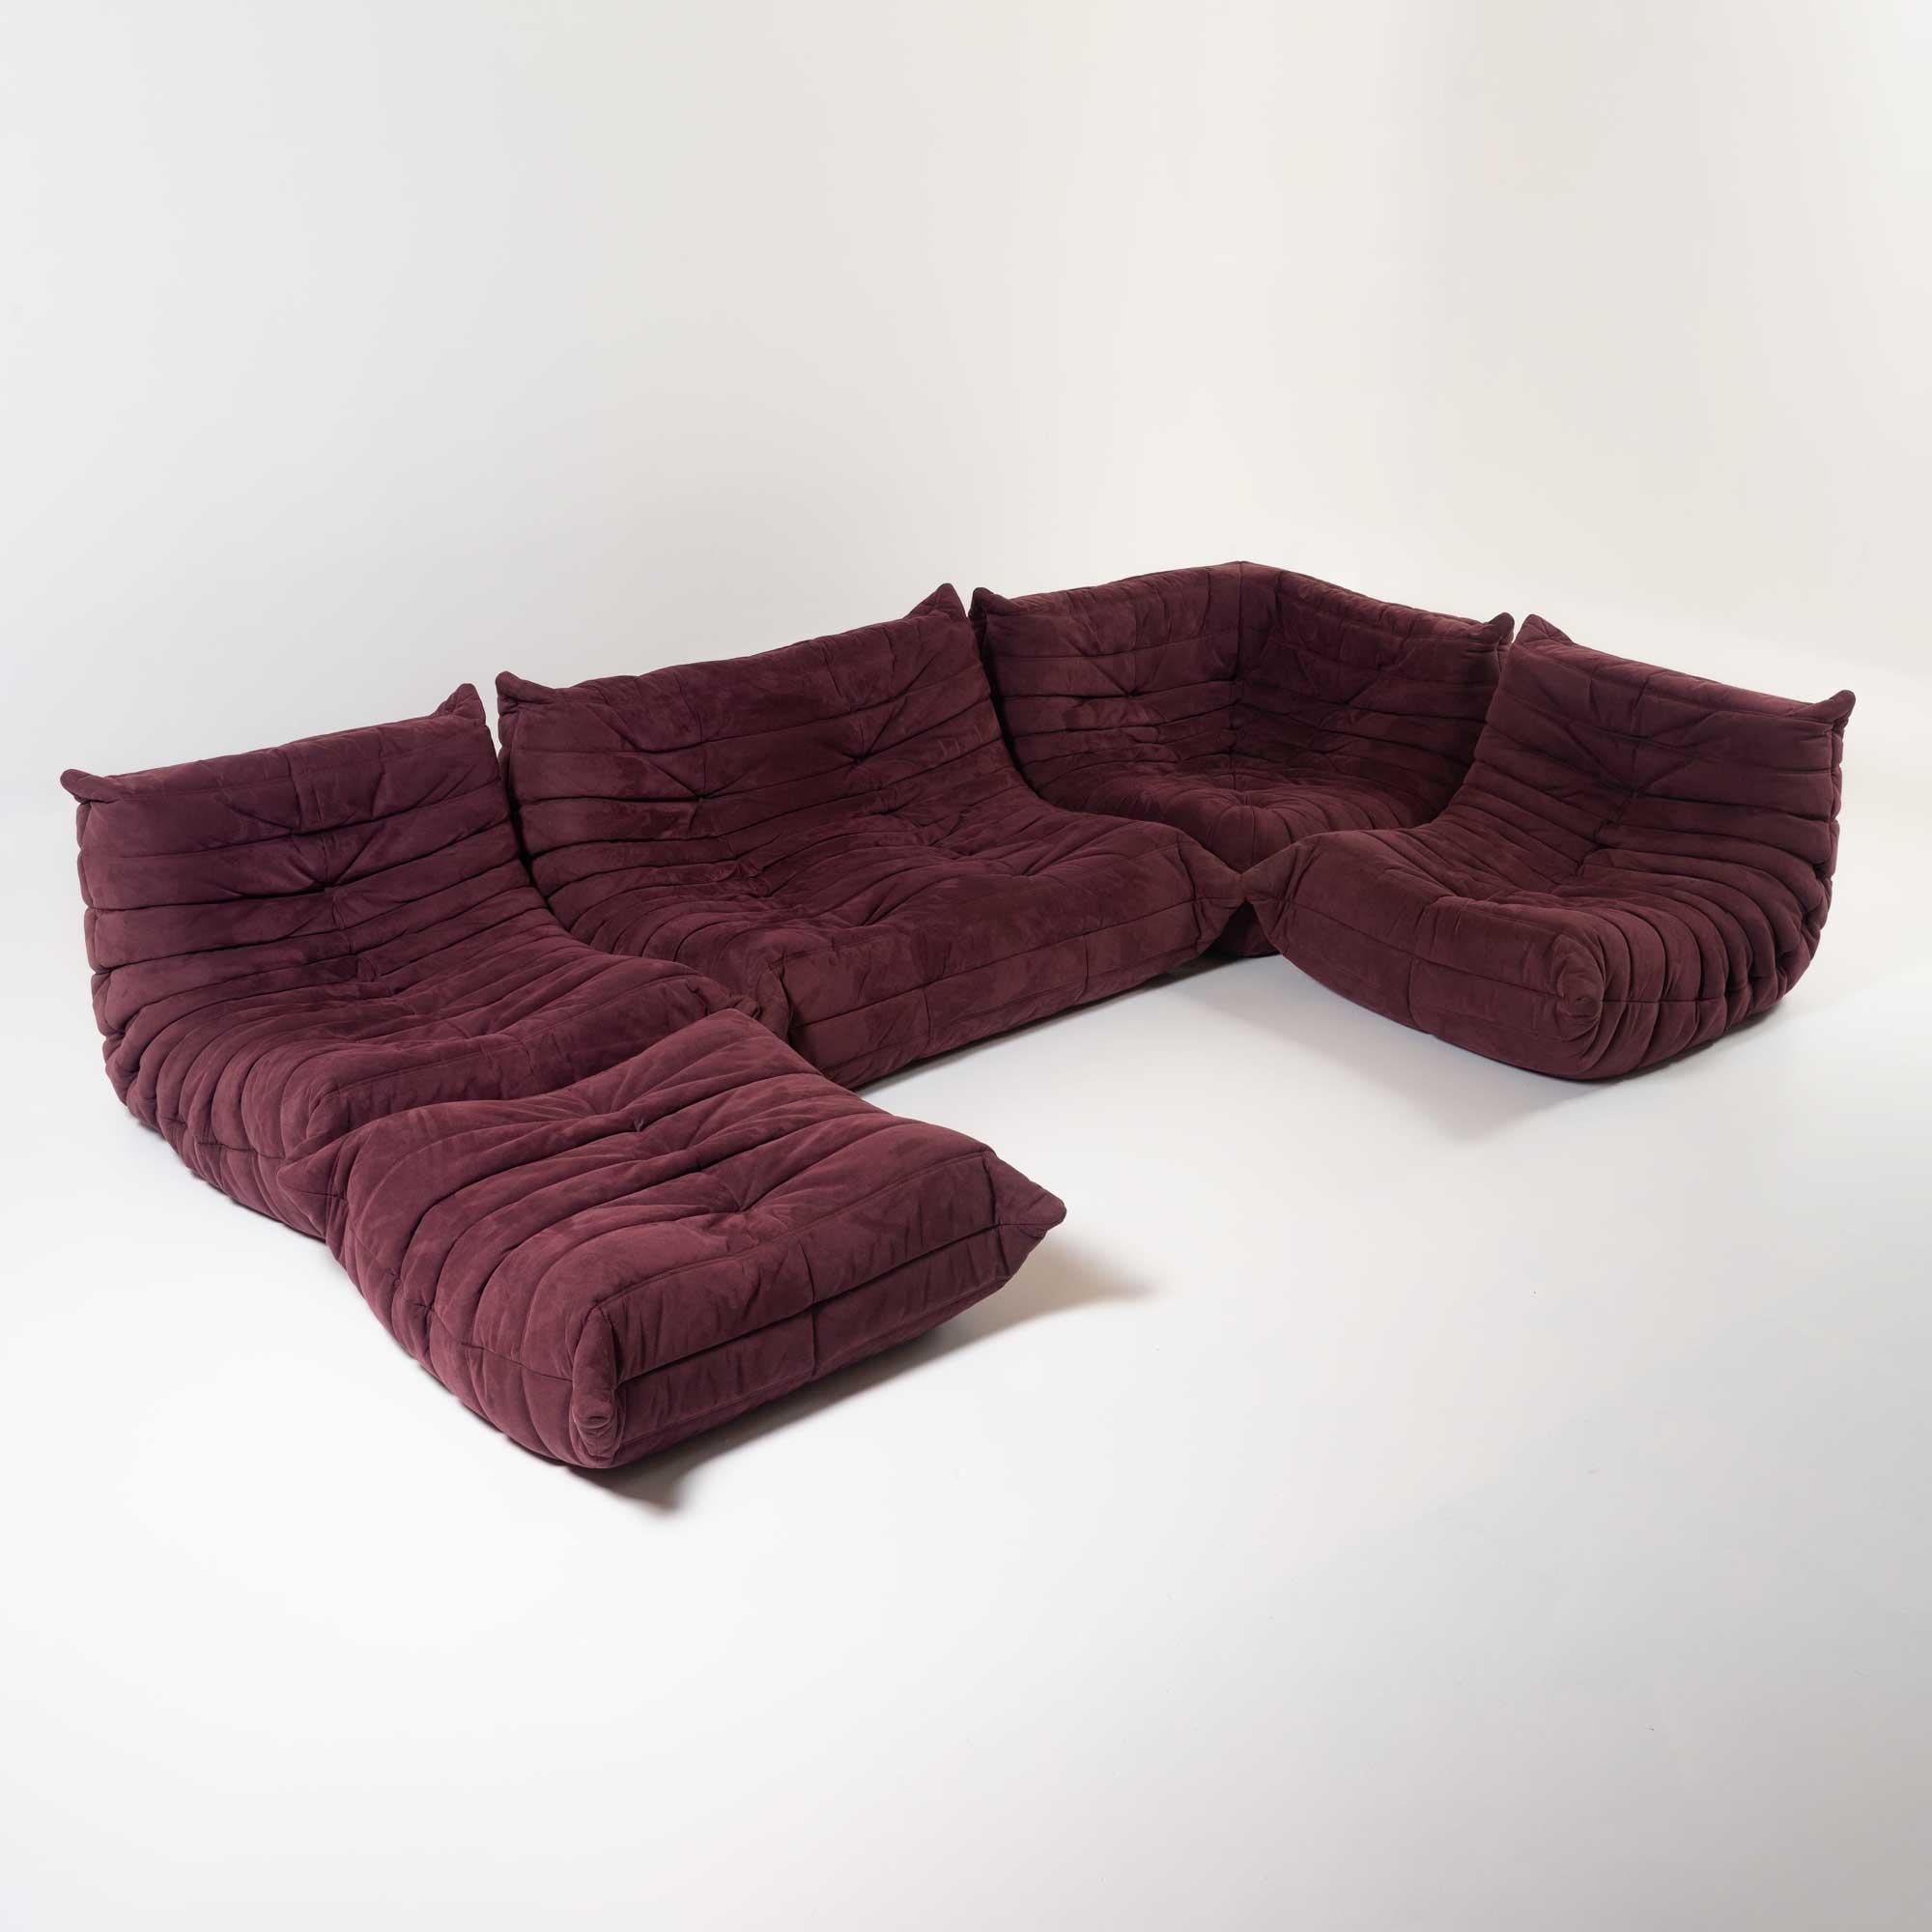 Classic French Togo set by Michel Ducaroy for luxury brand Ligne Roset. Originally designed in the 1970s the iconic togo sofa is now a design classic. This set comes in it's original aubergine Alcantara which, unlike leather, doesn't get hot or